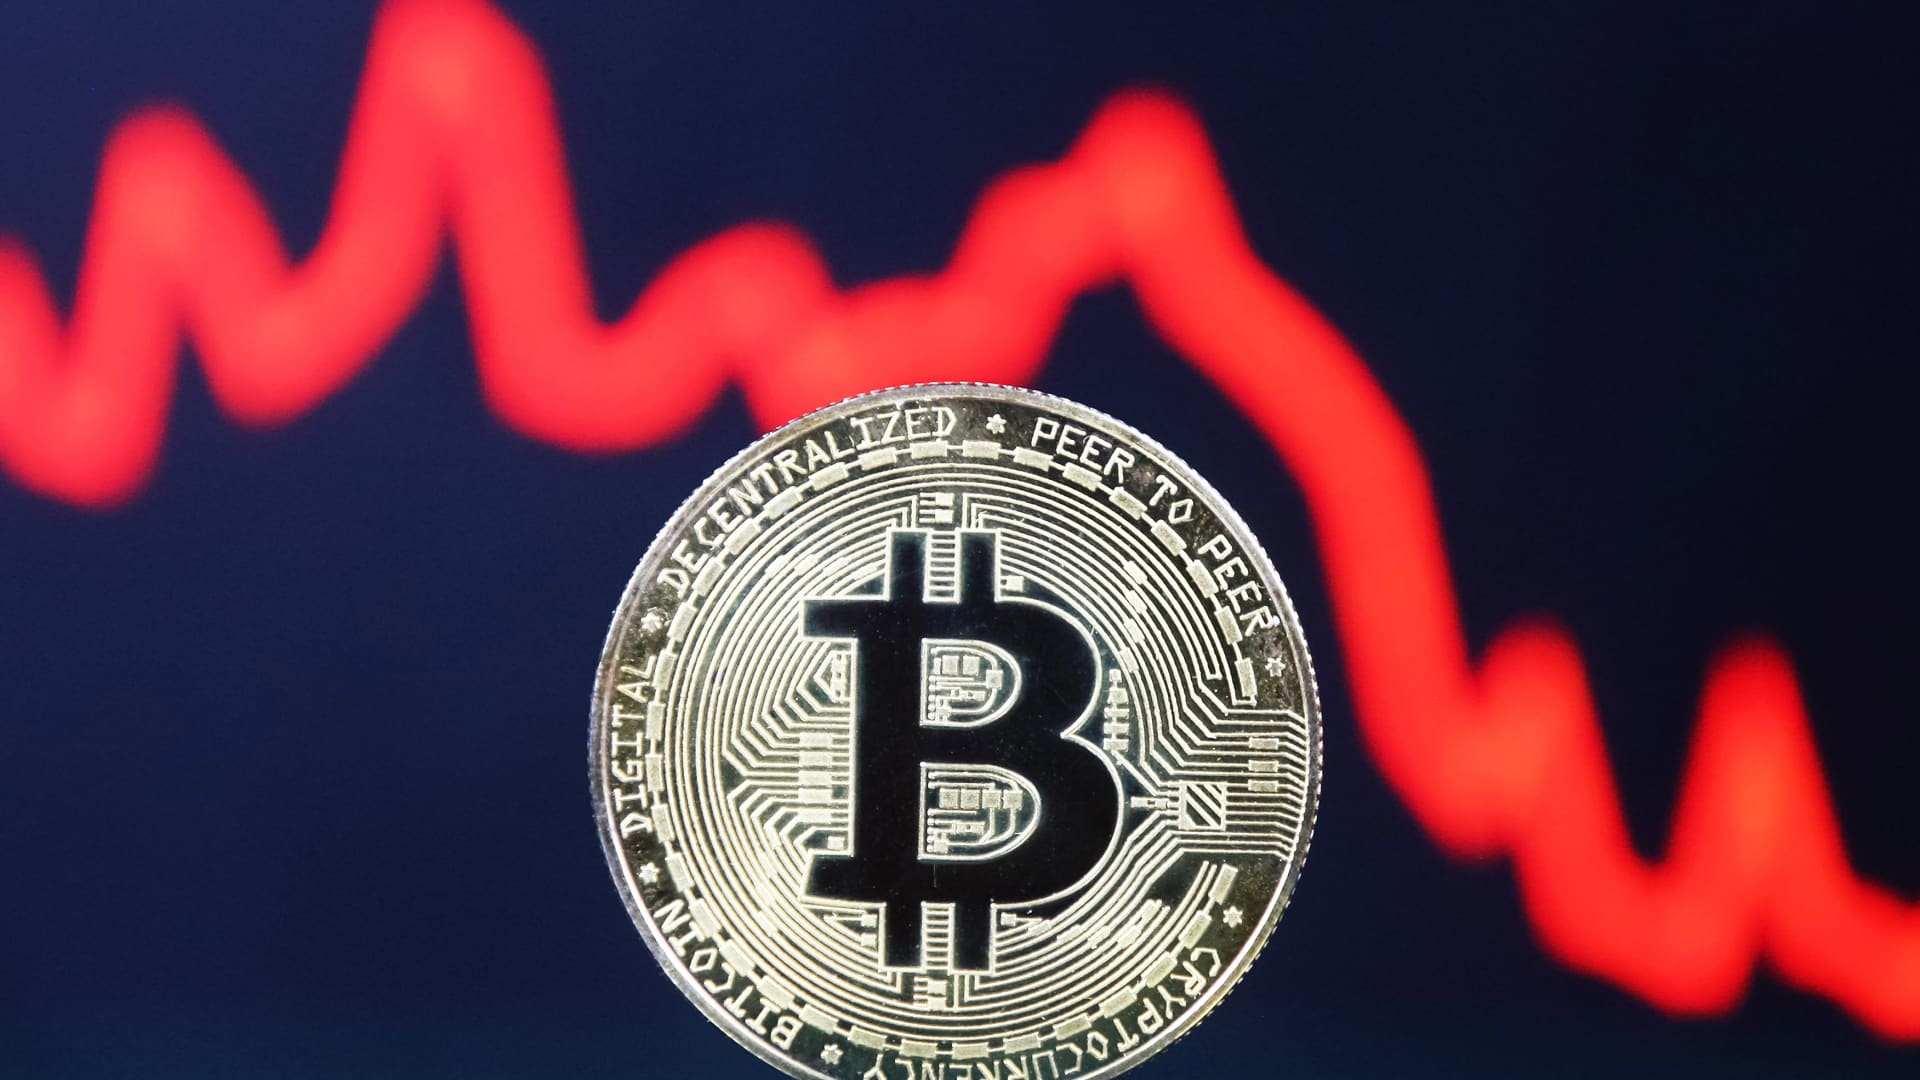 Bitcoin and other cryptocurrencies tumble amid Middle East tensions